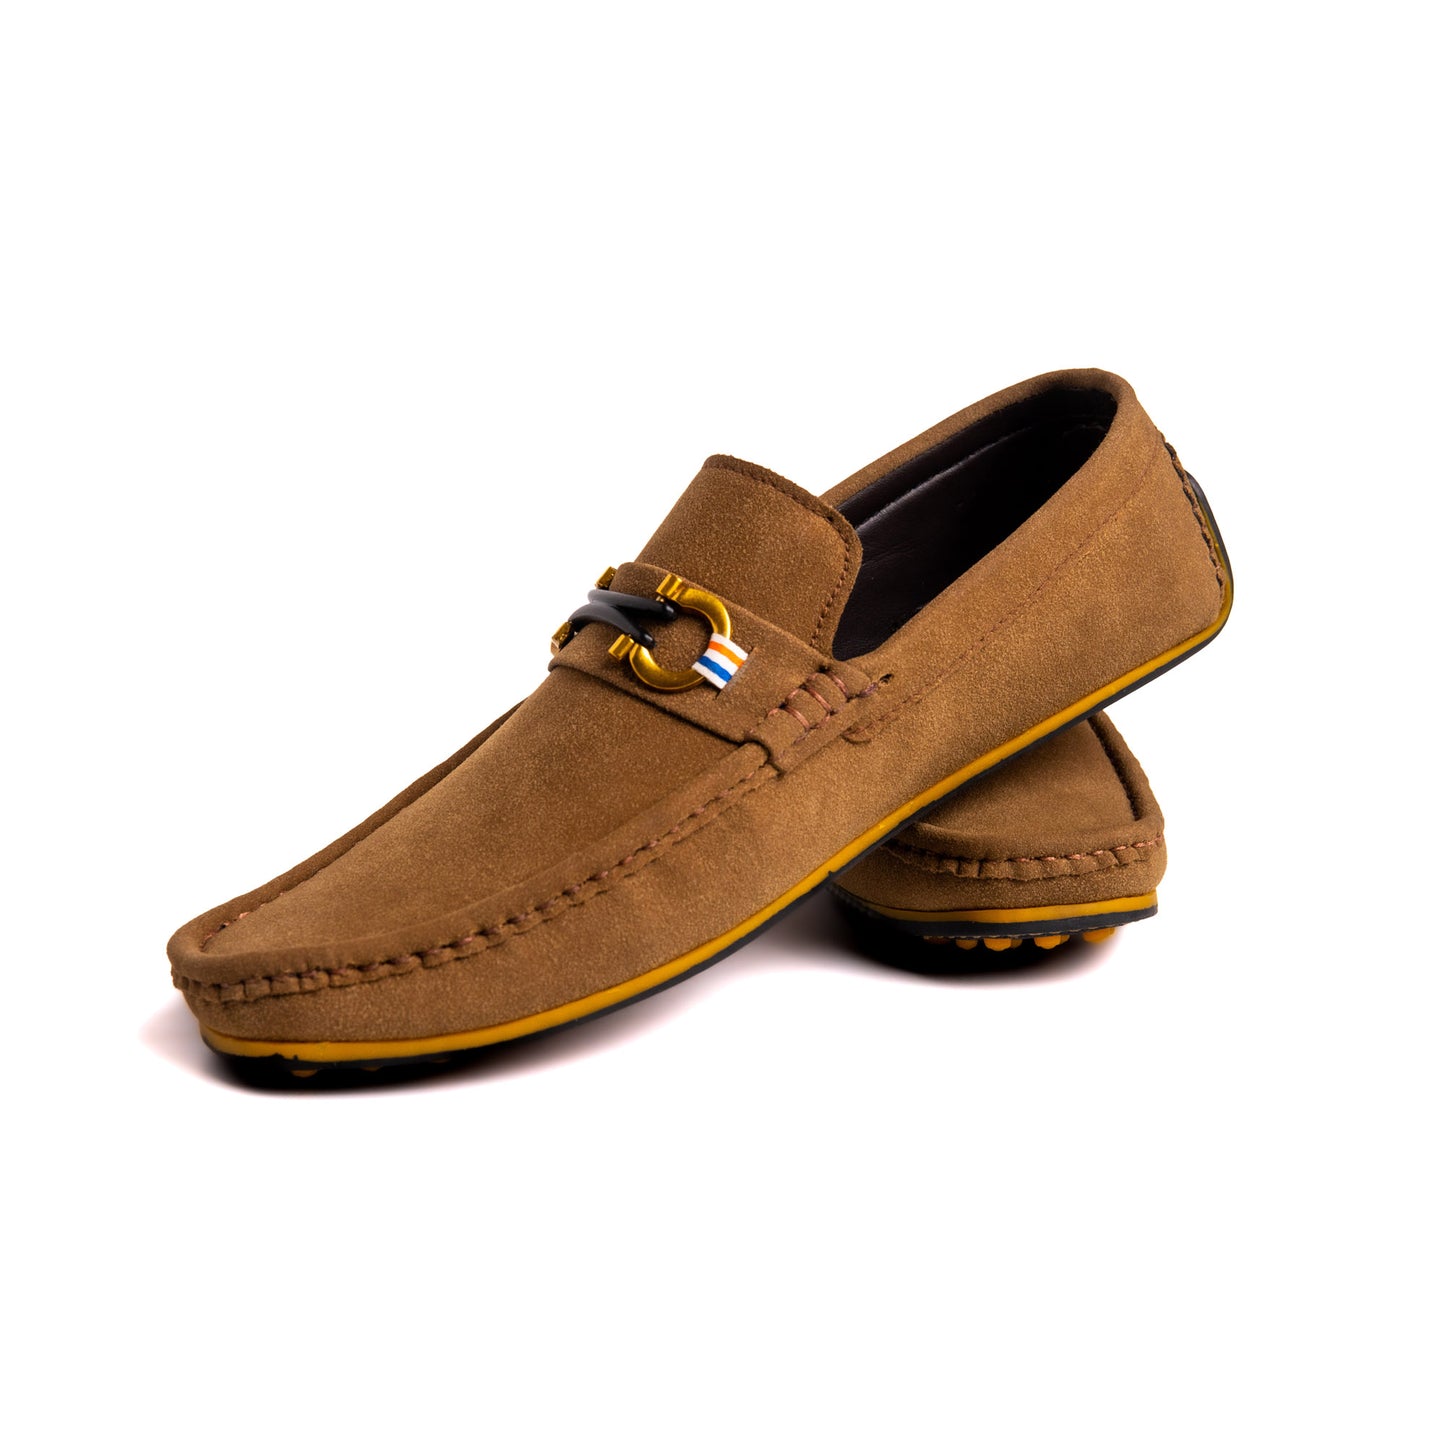 Premium PU Leather Styled Buckle Moccasins